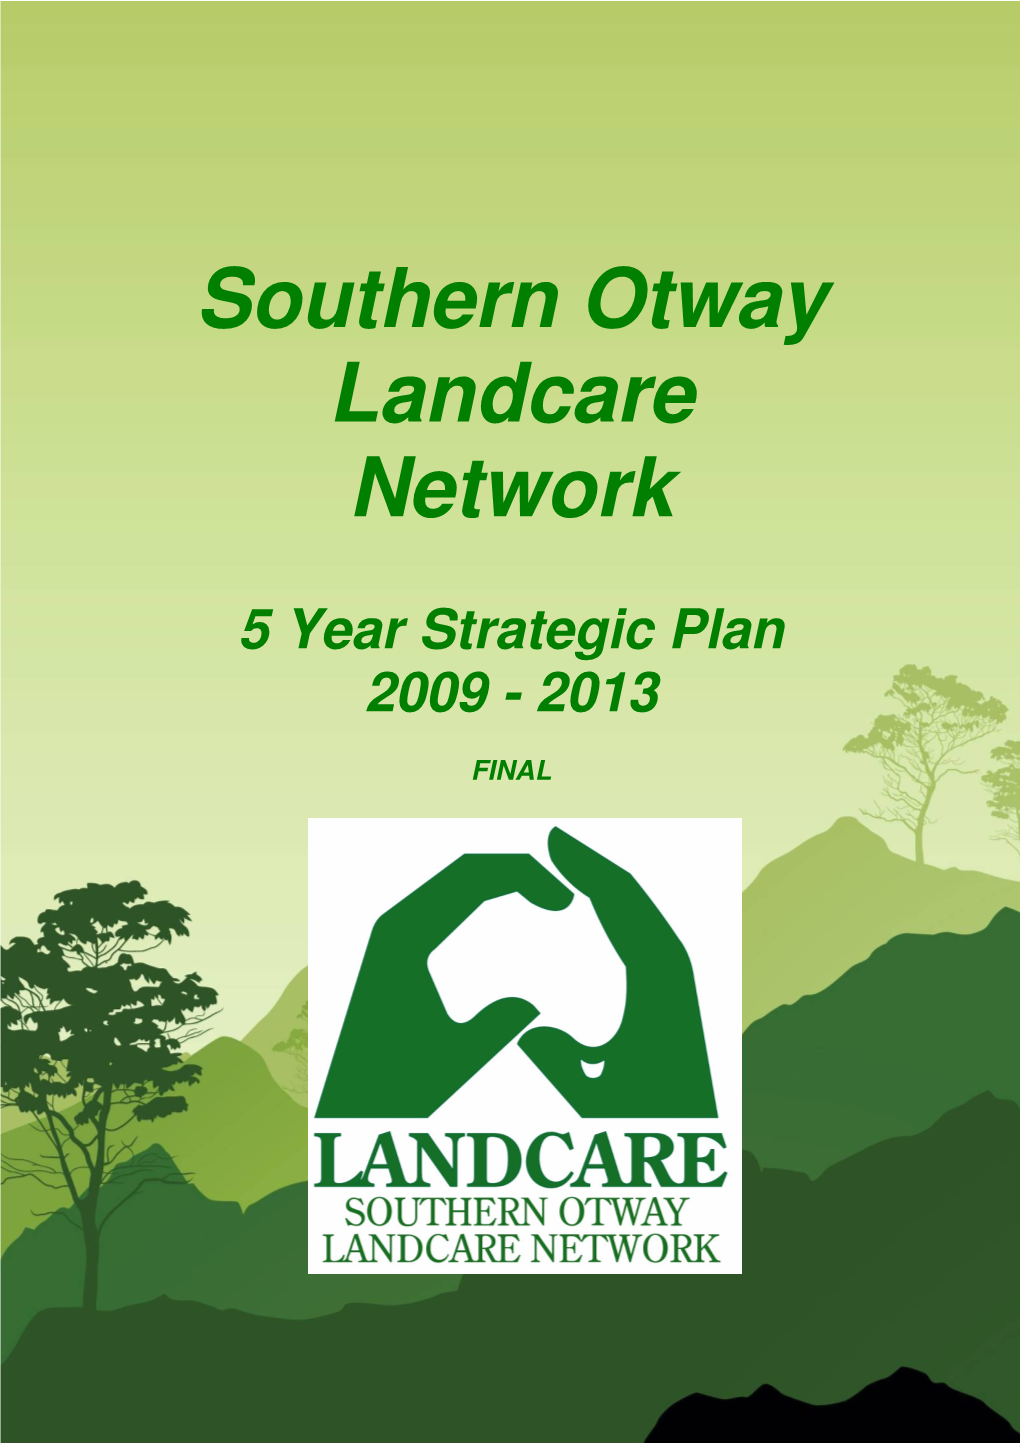 Southern Otway Landcare Network